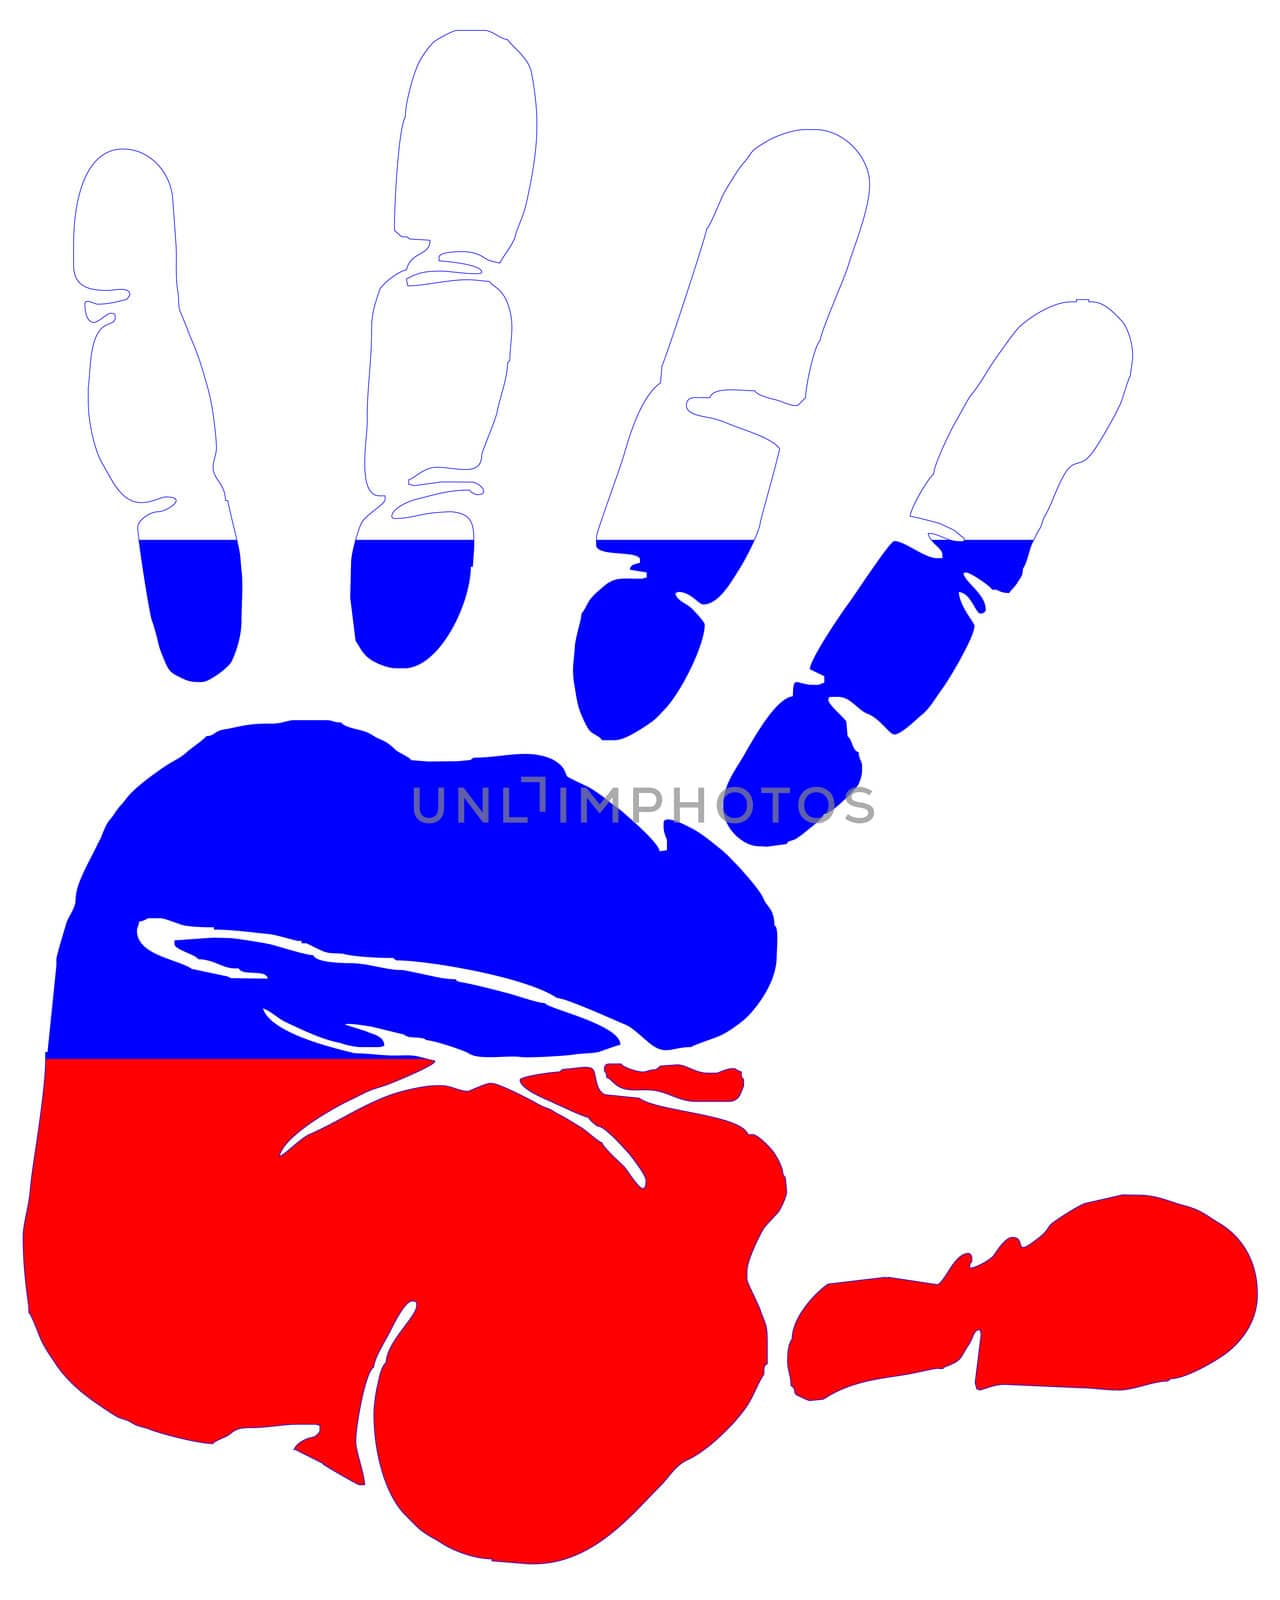 Hand print impression of flag of Russia